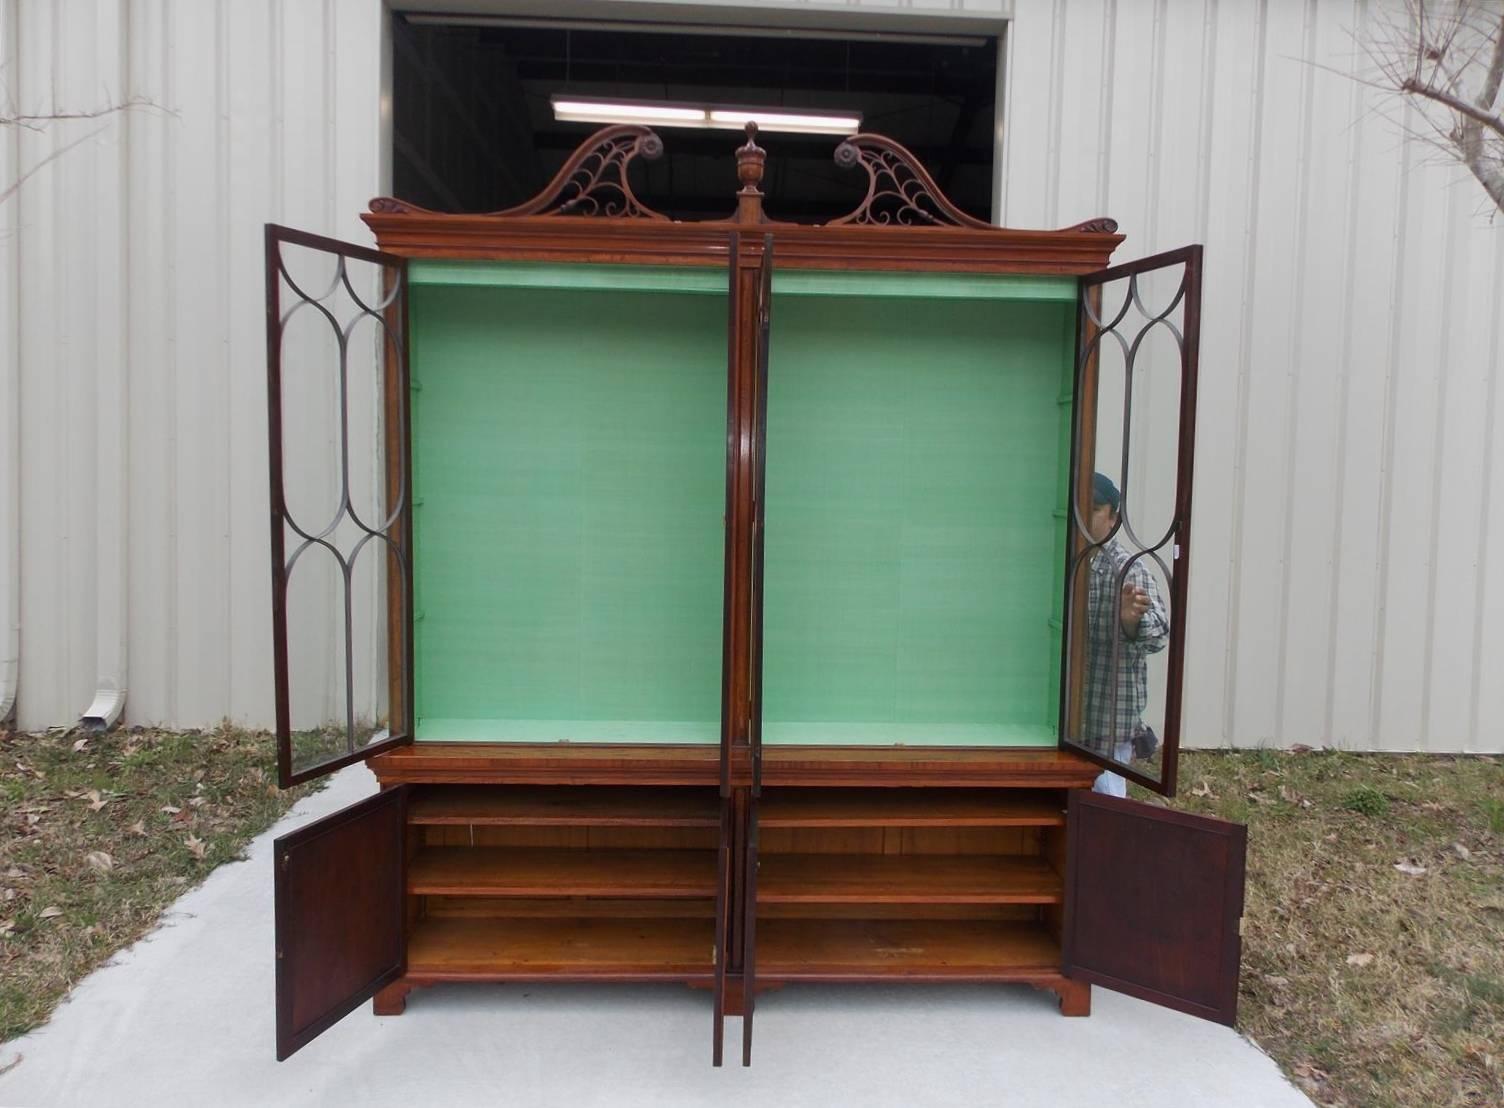 
English Regency yew and satinwood breakfront with carved floral medallions, broken arched fretwork pediment, carved centered urn, adjustable upper and lower interior shelving, original glass doors with arched mullions, and resting on inlaid oval